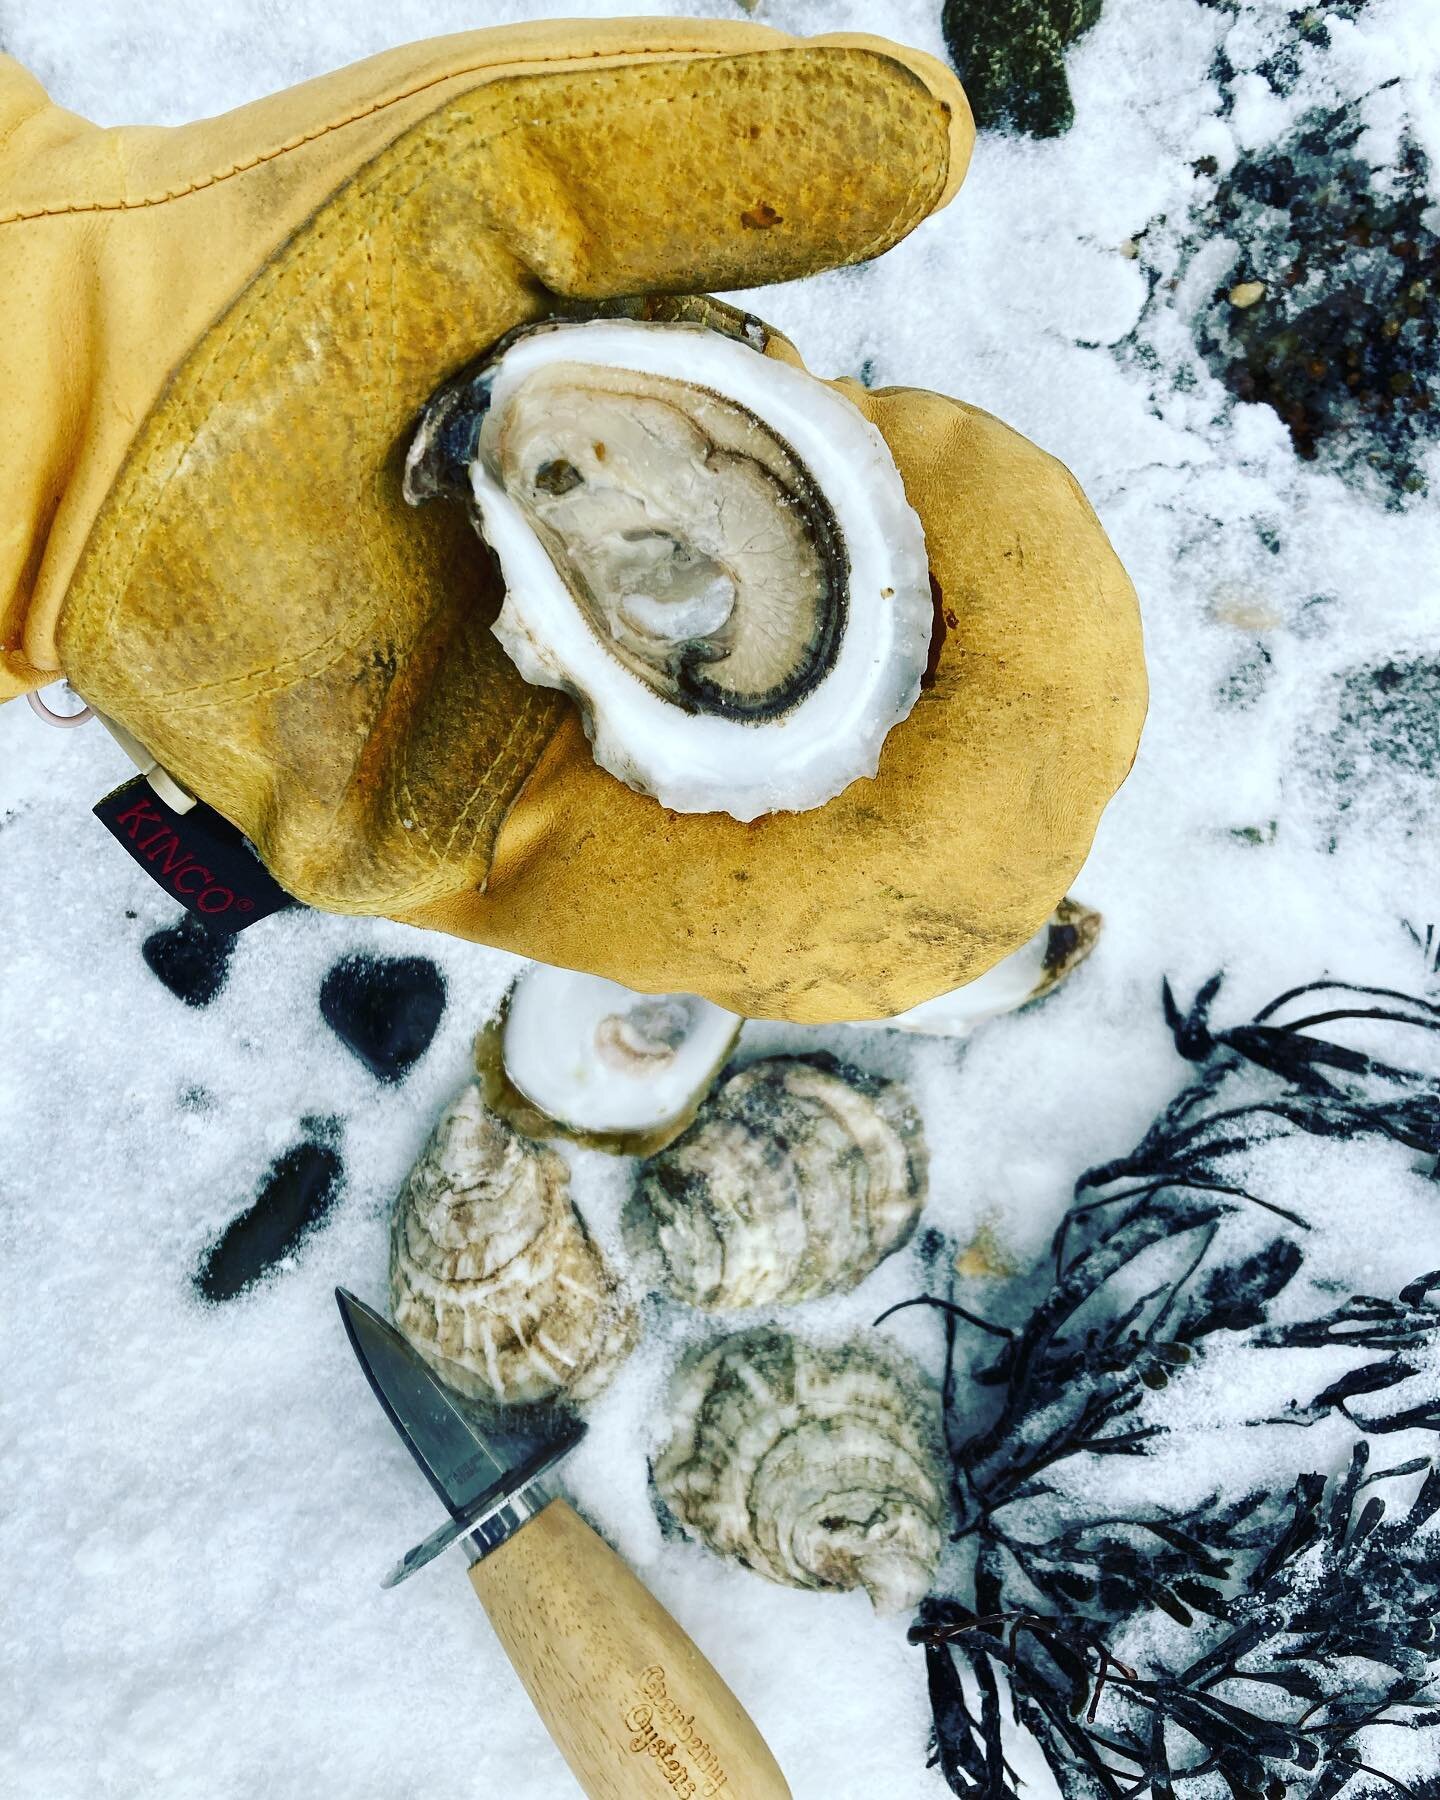 If you&rsquo;re in the Portland area check out our winter harvest from the icy cold waters off the Cranberry Isles @eventideoysterco !! Ever since I first visited the raw bar there I dreamed of making it &ldquo;on the rock.&rdquo; Big day for me as a